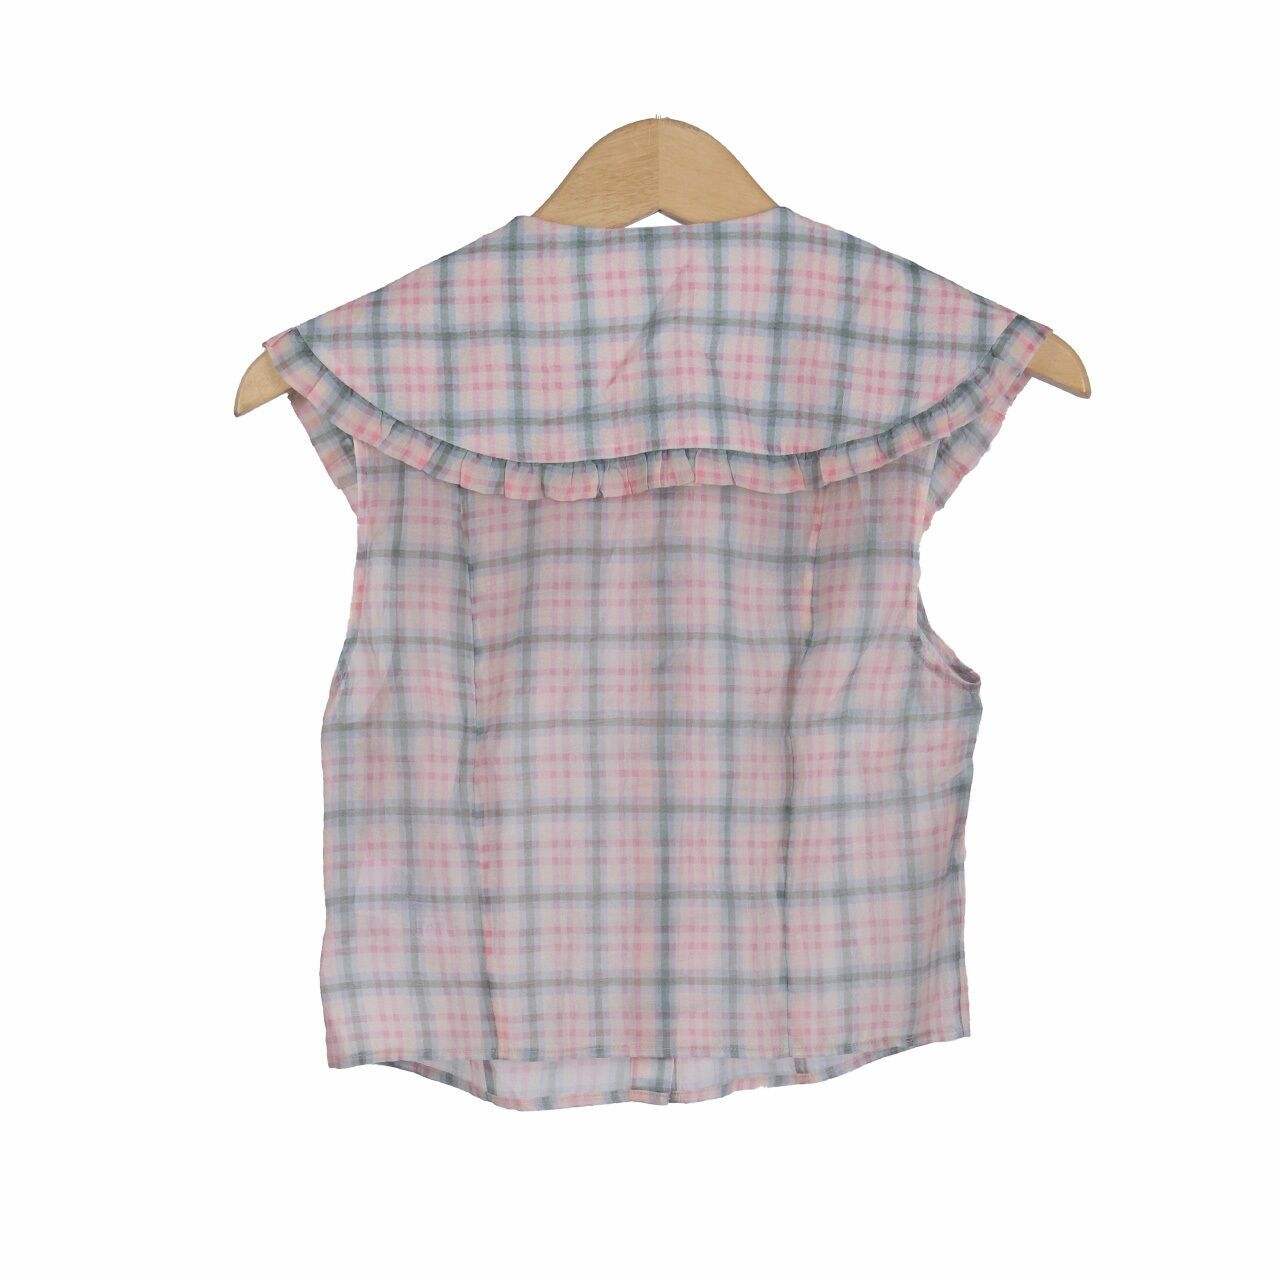 & Other Stories Multicolour Plaid Sleeveless